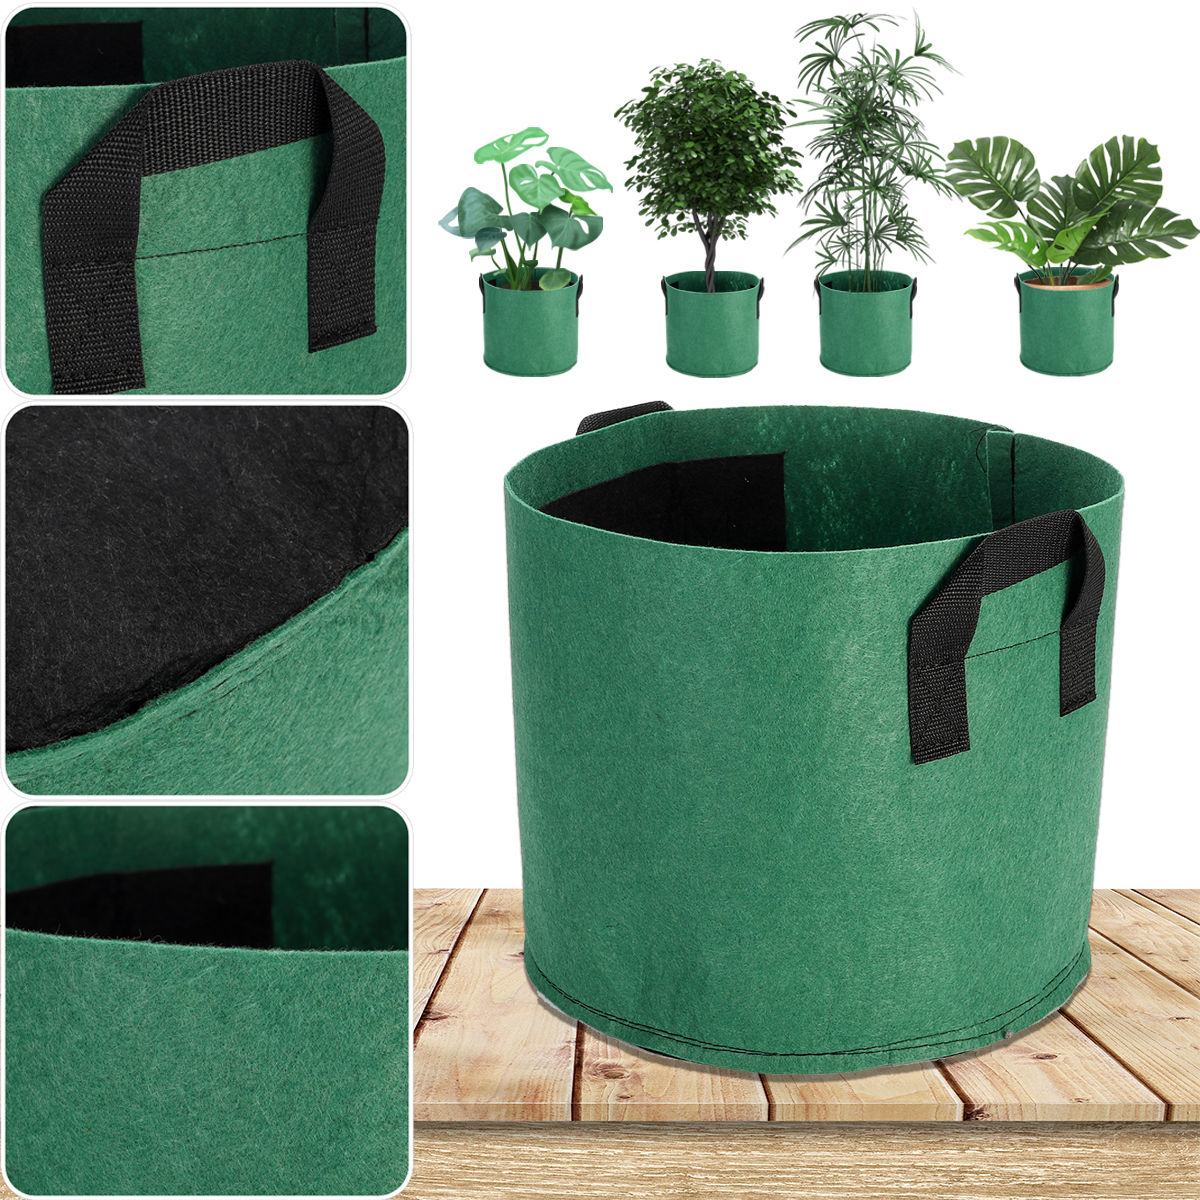 1235710Gallon-Felt-Non-Woven-Pots-Plant-Grow-Bag-Planting-Pouch-Container-Nursery-Seedling-Planting--1543442-2